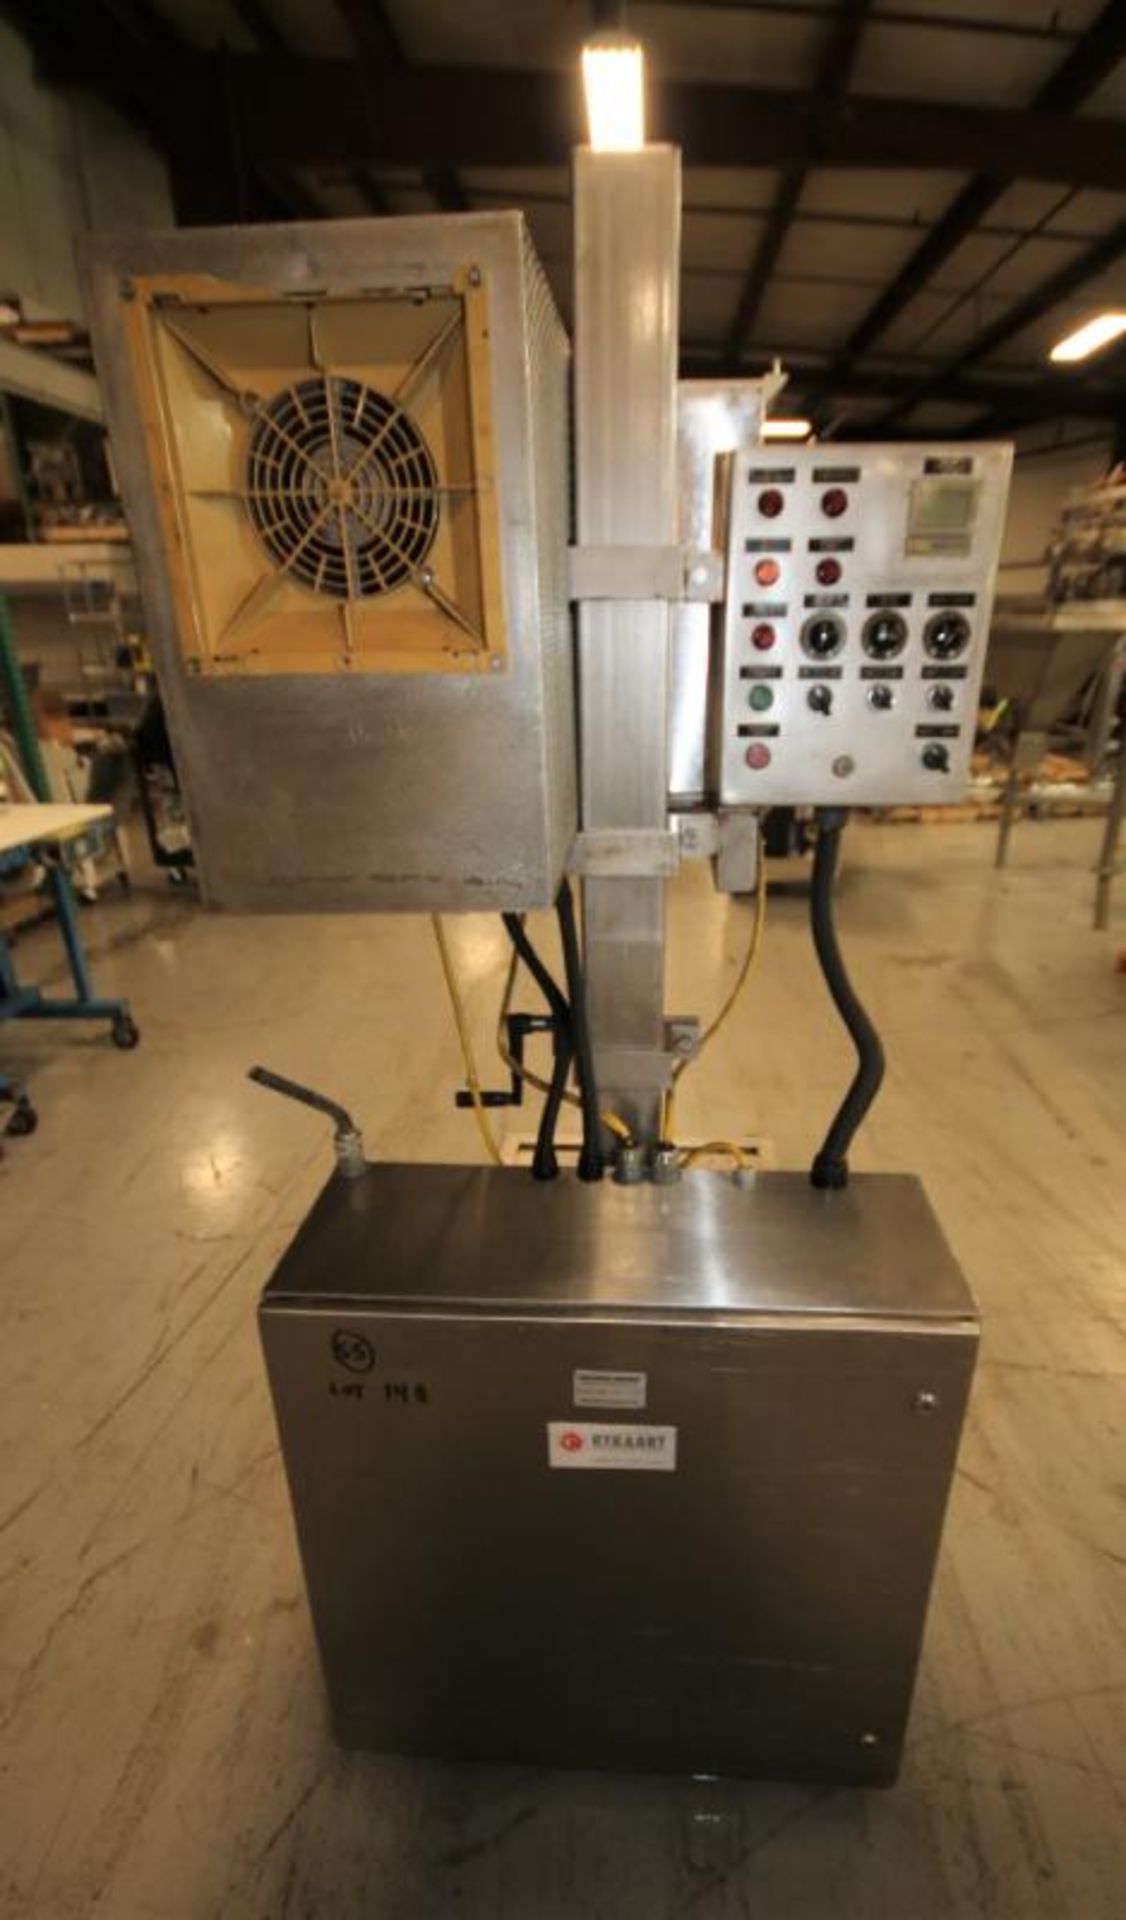 Rykaart Food Makers Equip. 22" W Portable S/S Flour Depositor, with 24" L x 14" W Feed Hopper, - Image 5 of 7